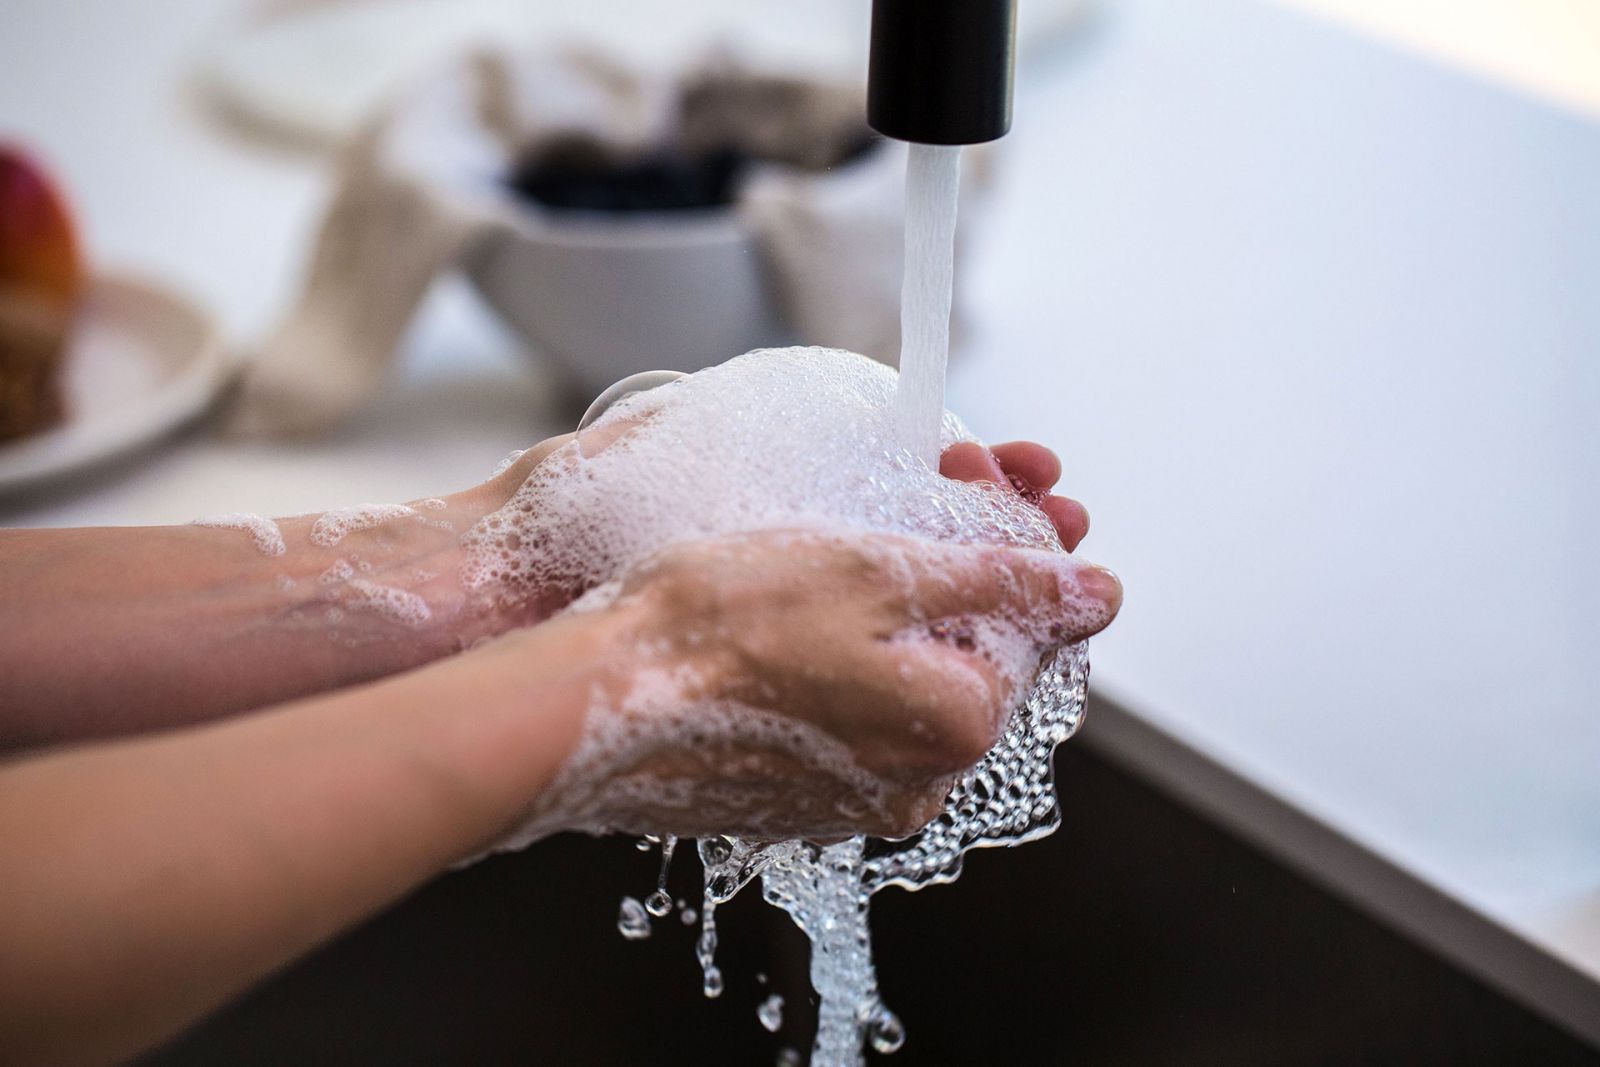 Wash hands thoroughly and regularly